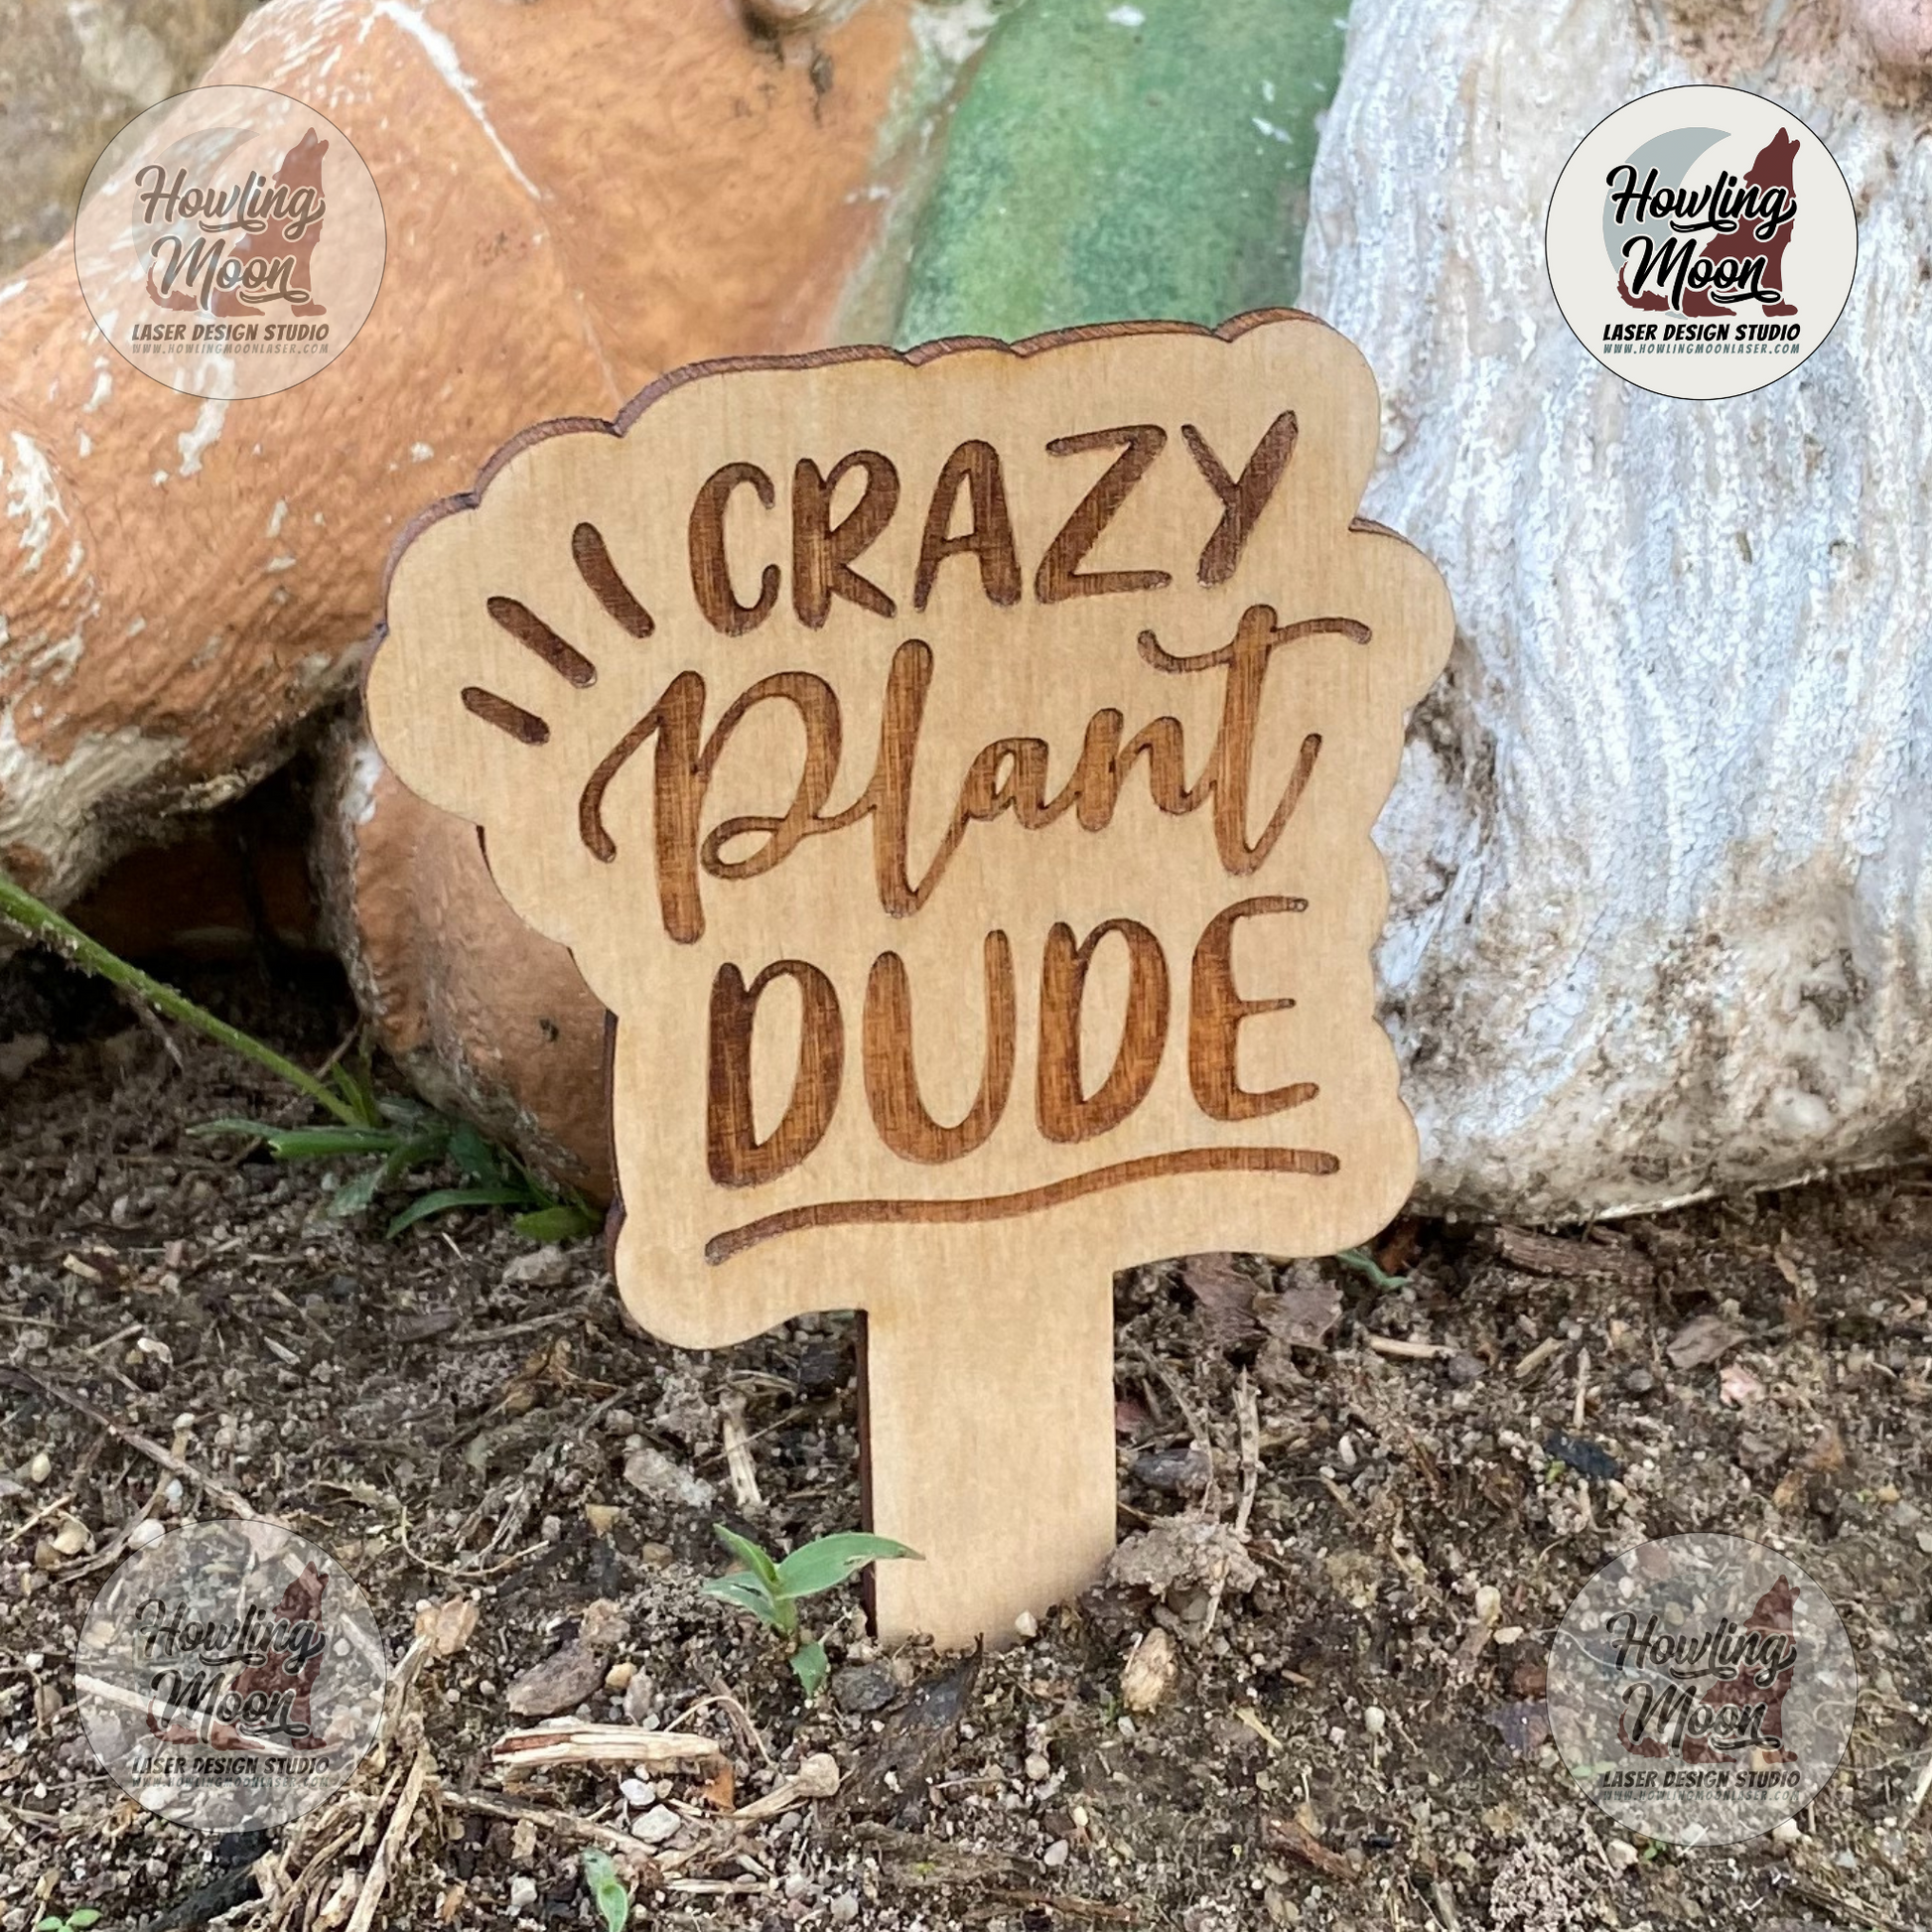 Crazy Plant Dude Garden Stake is a great gift for Gardeners - handmade by Howling Moon Laser Design